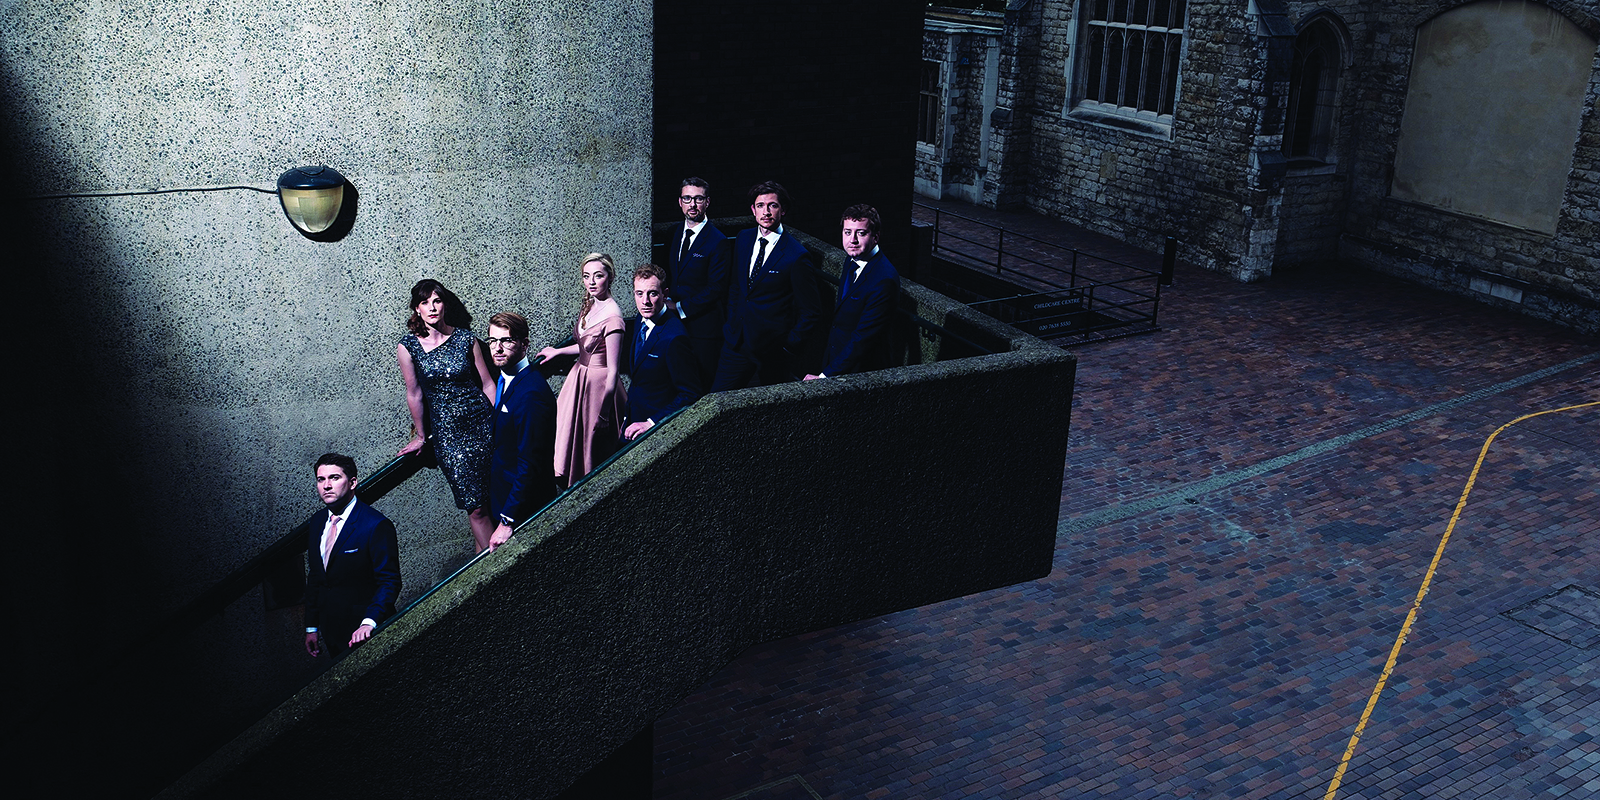 UGA Presents brings VOCES8 to Athens